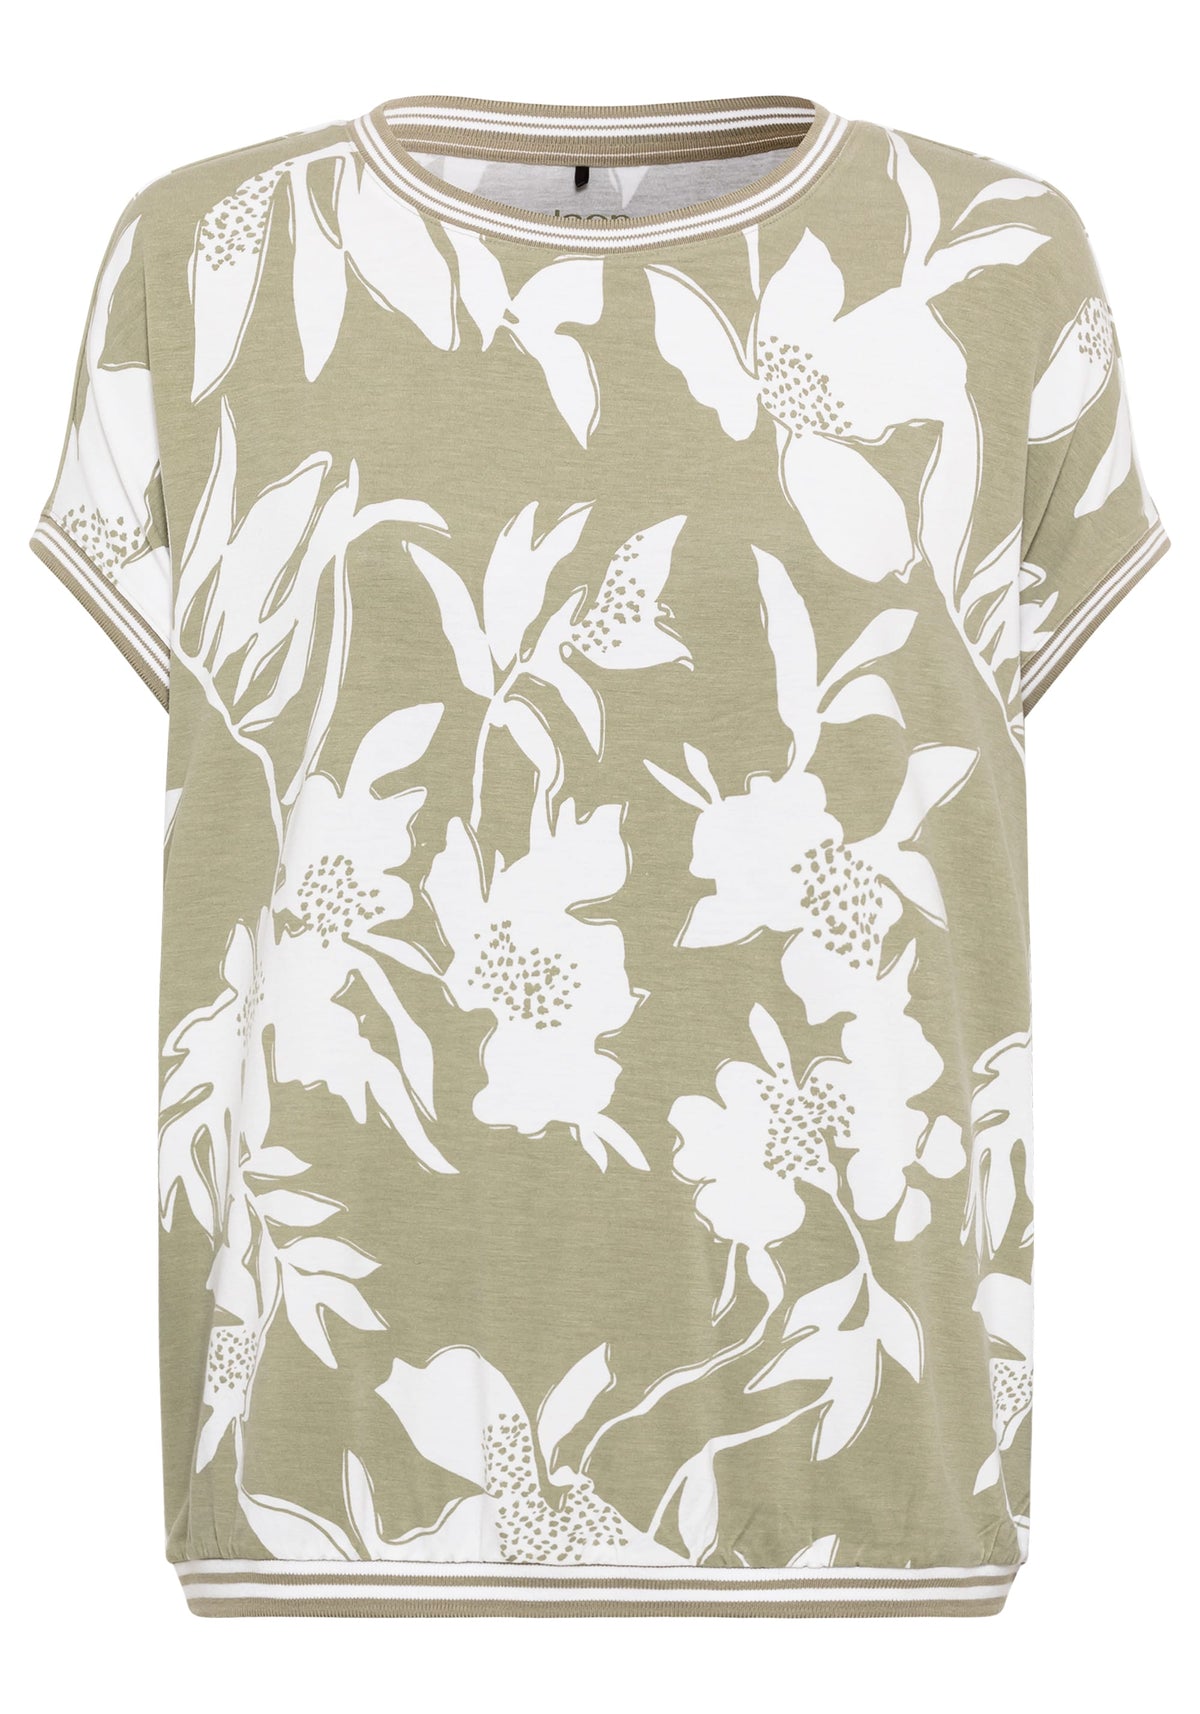 Short Sleeve Abstract Floral Print T-Shirt containing LENZING™ ECOVERO™ Viscose